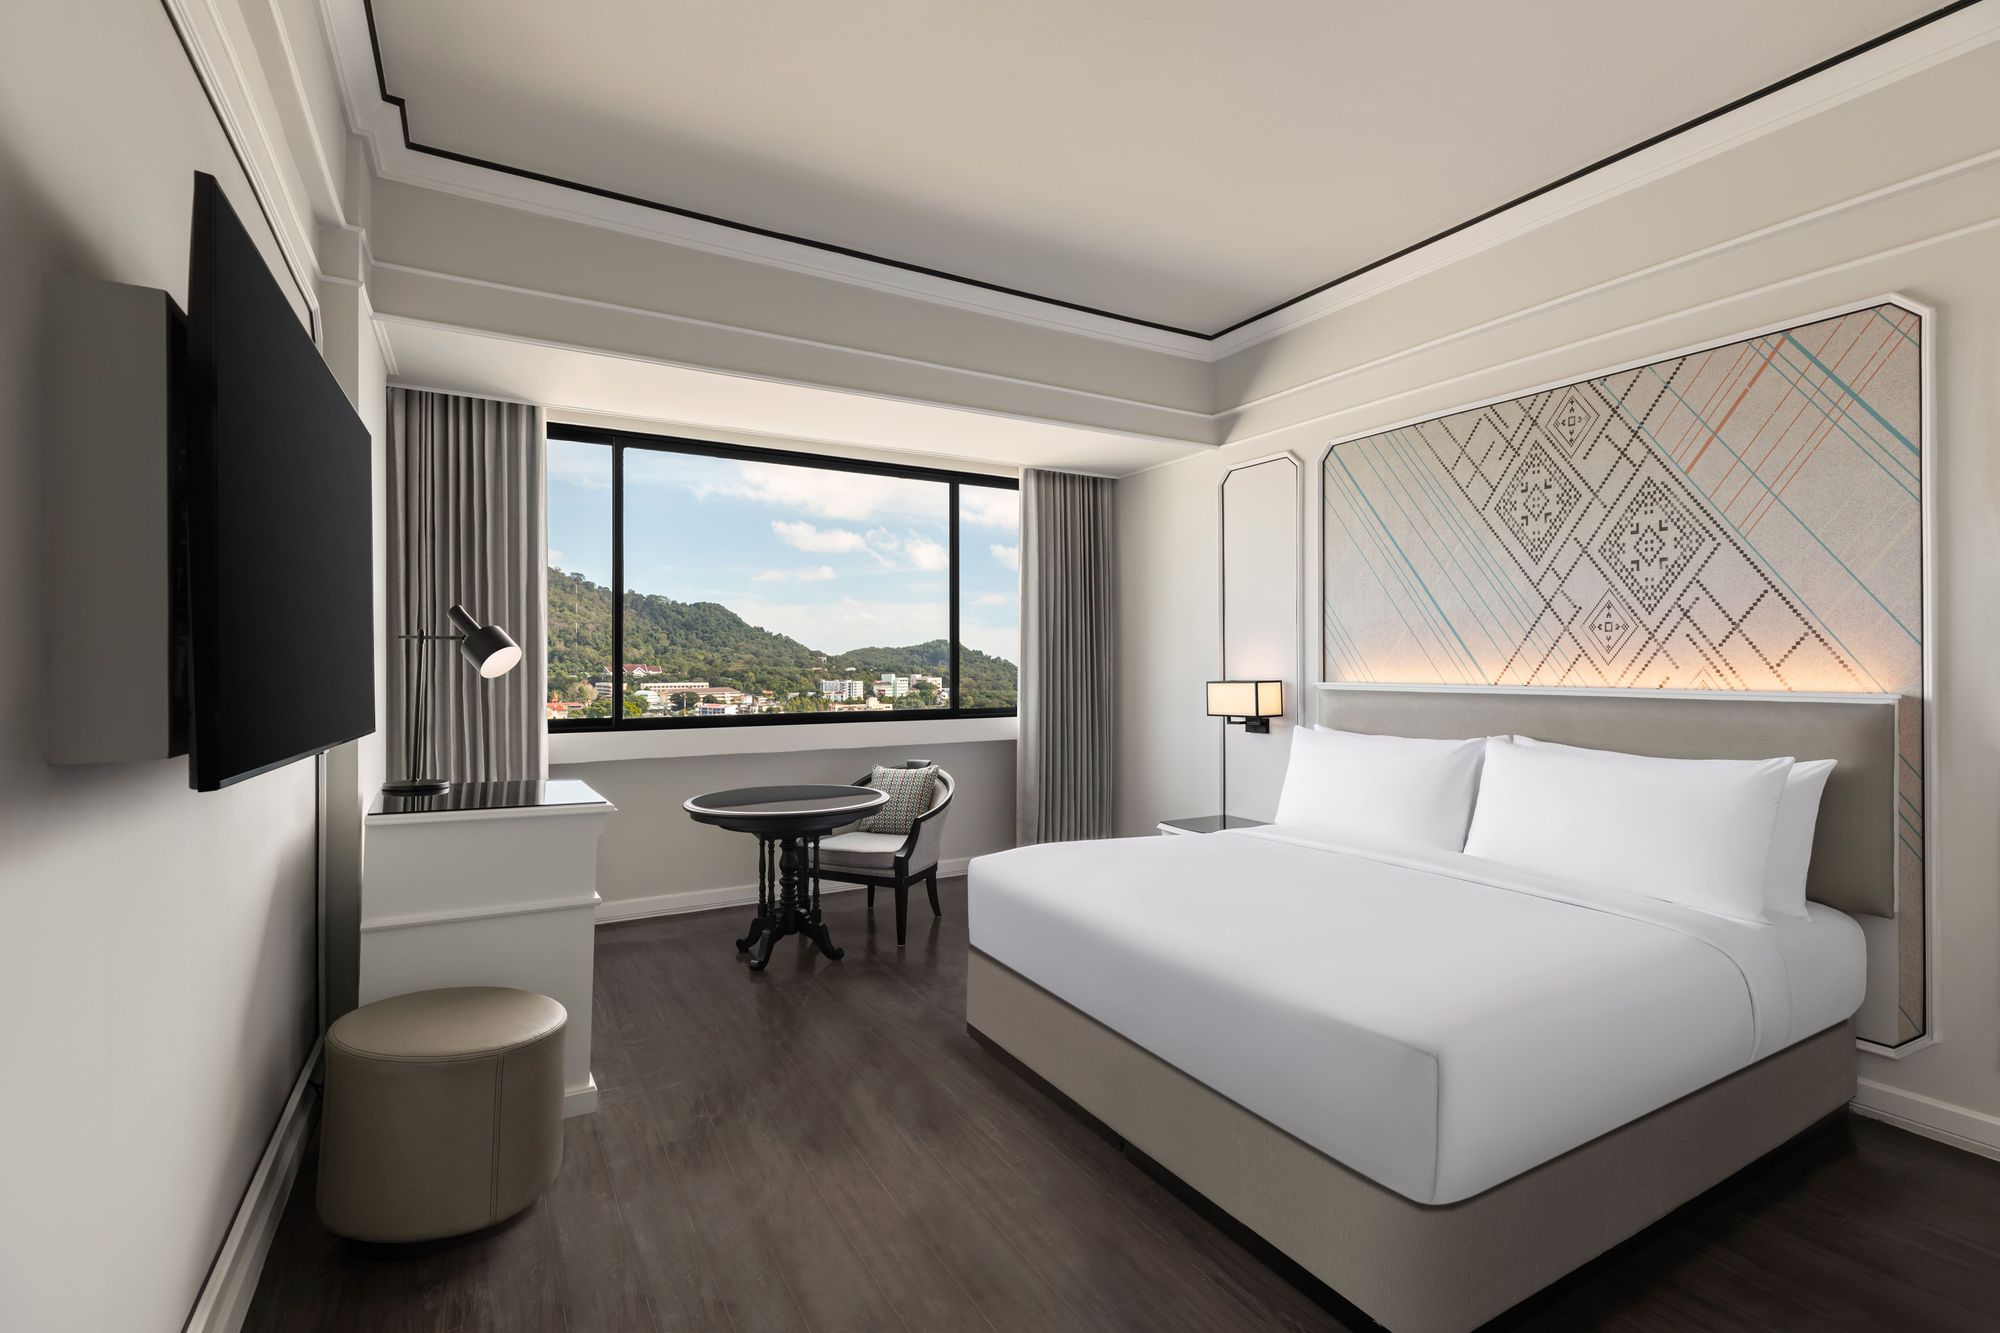 Hotel Review: Courtyard by Marriott, Old Town Phuket